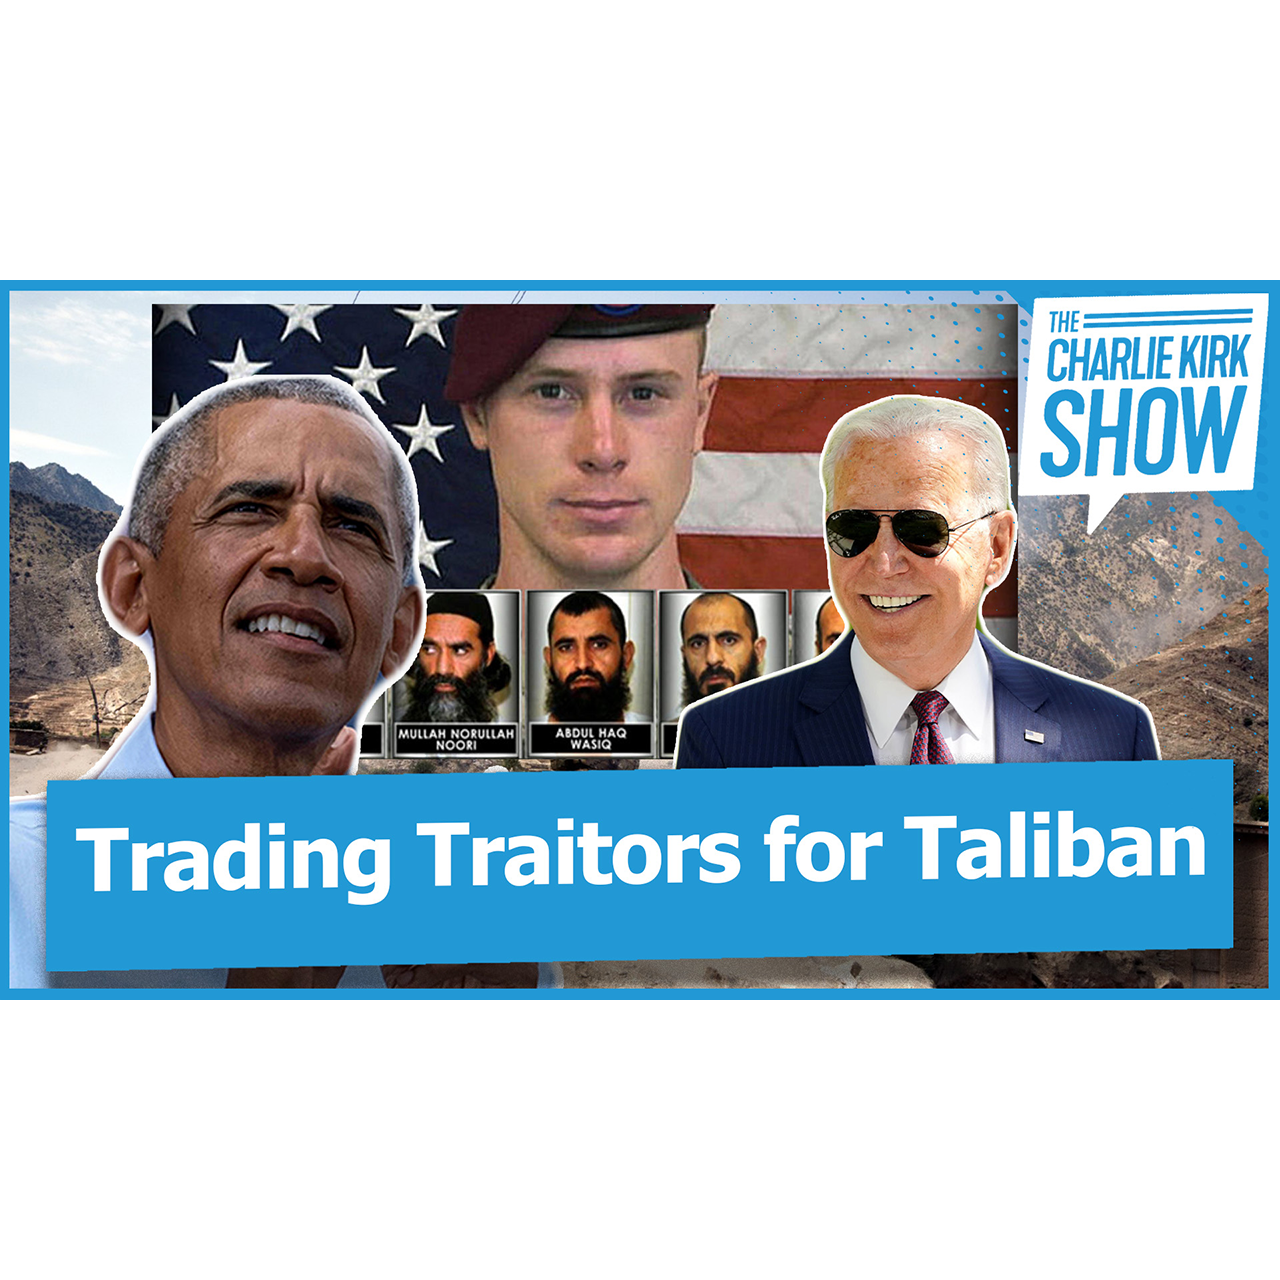 Trading Traitors for Taliban